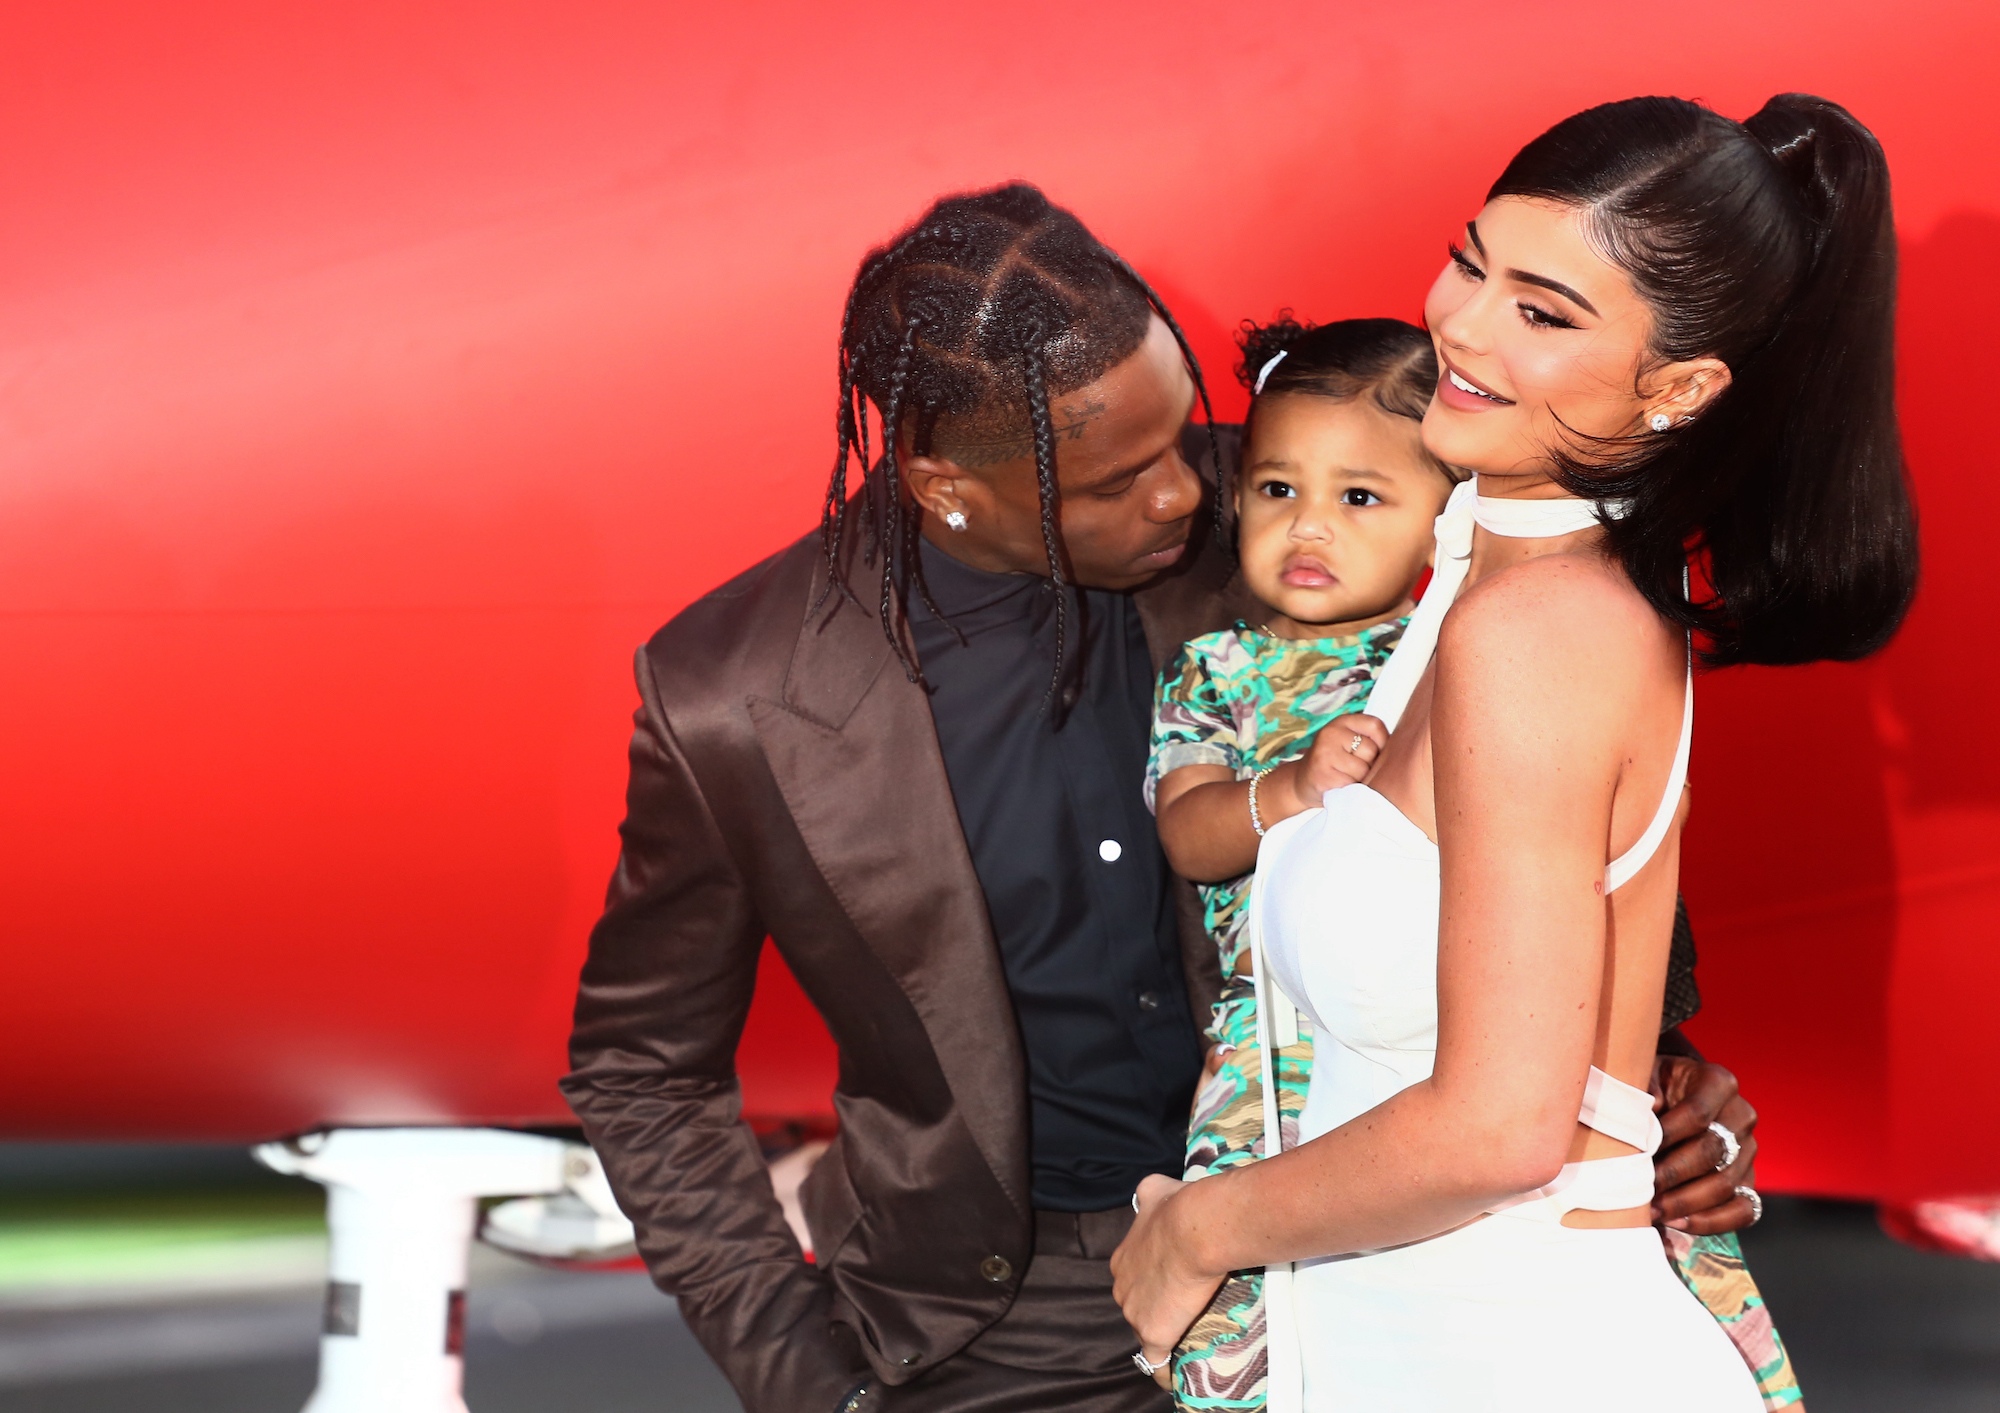 Travis Scott and Kylie Jenner with their daughter Stormi in August 2019